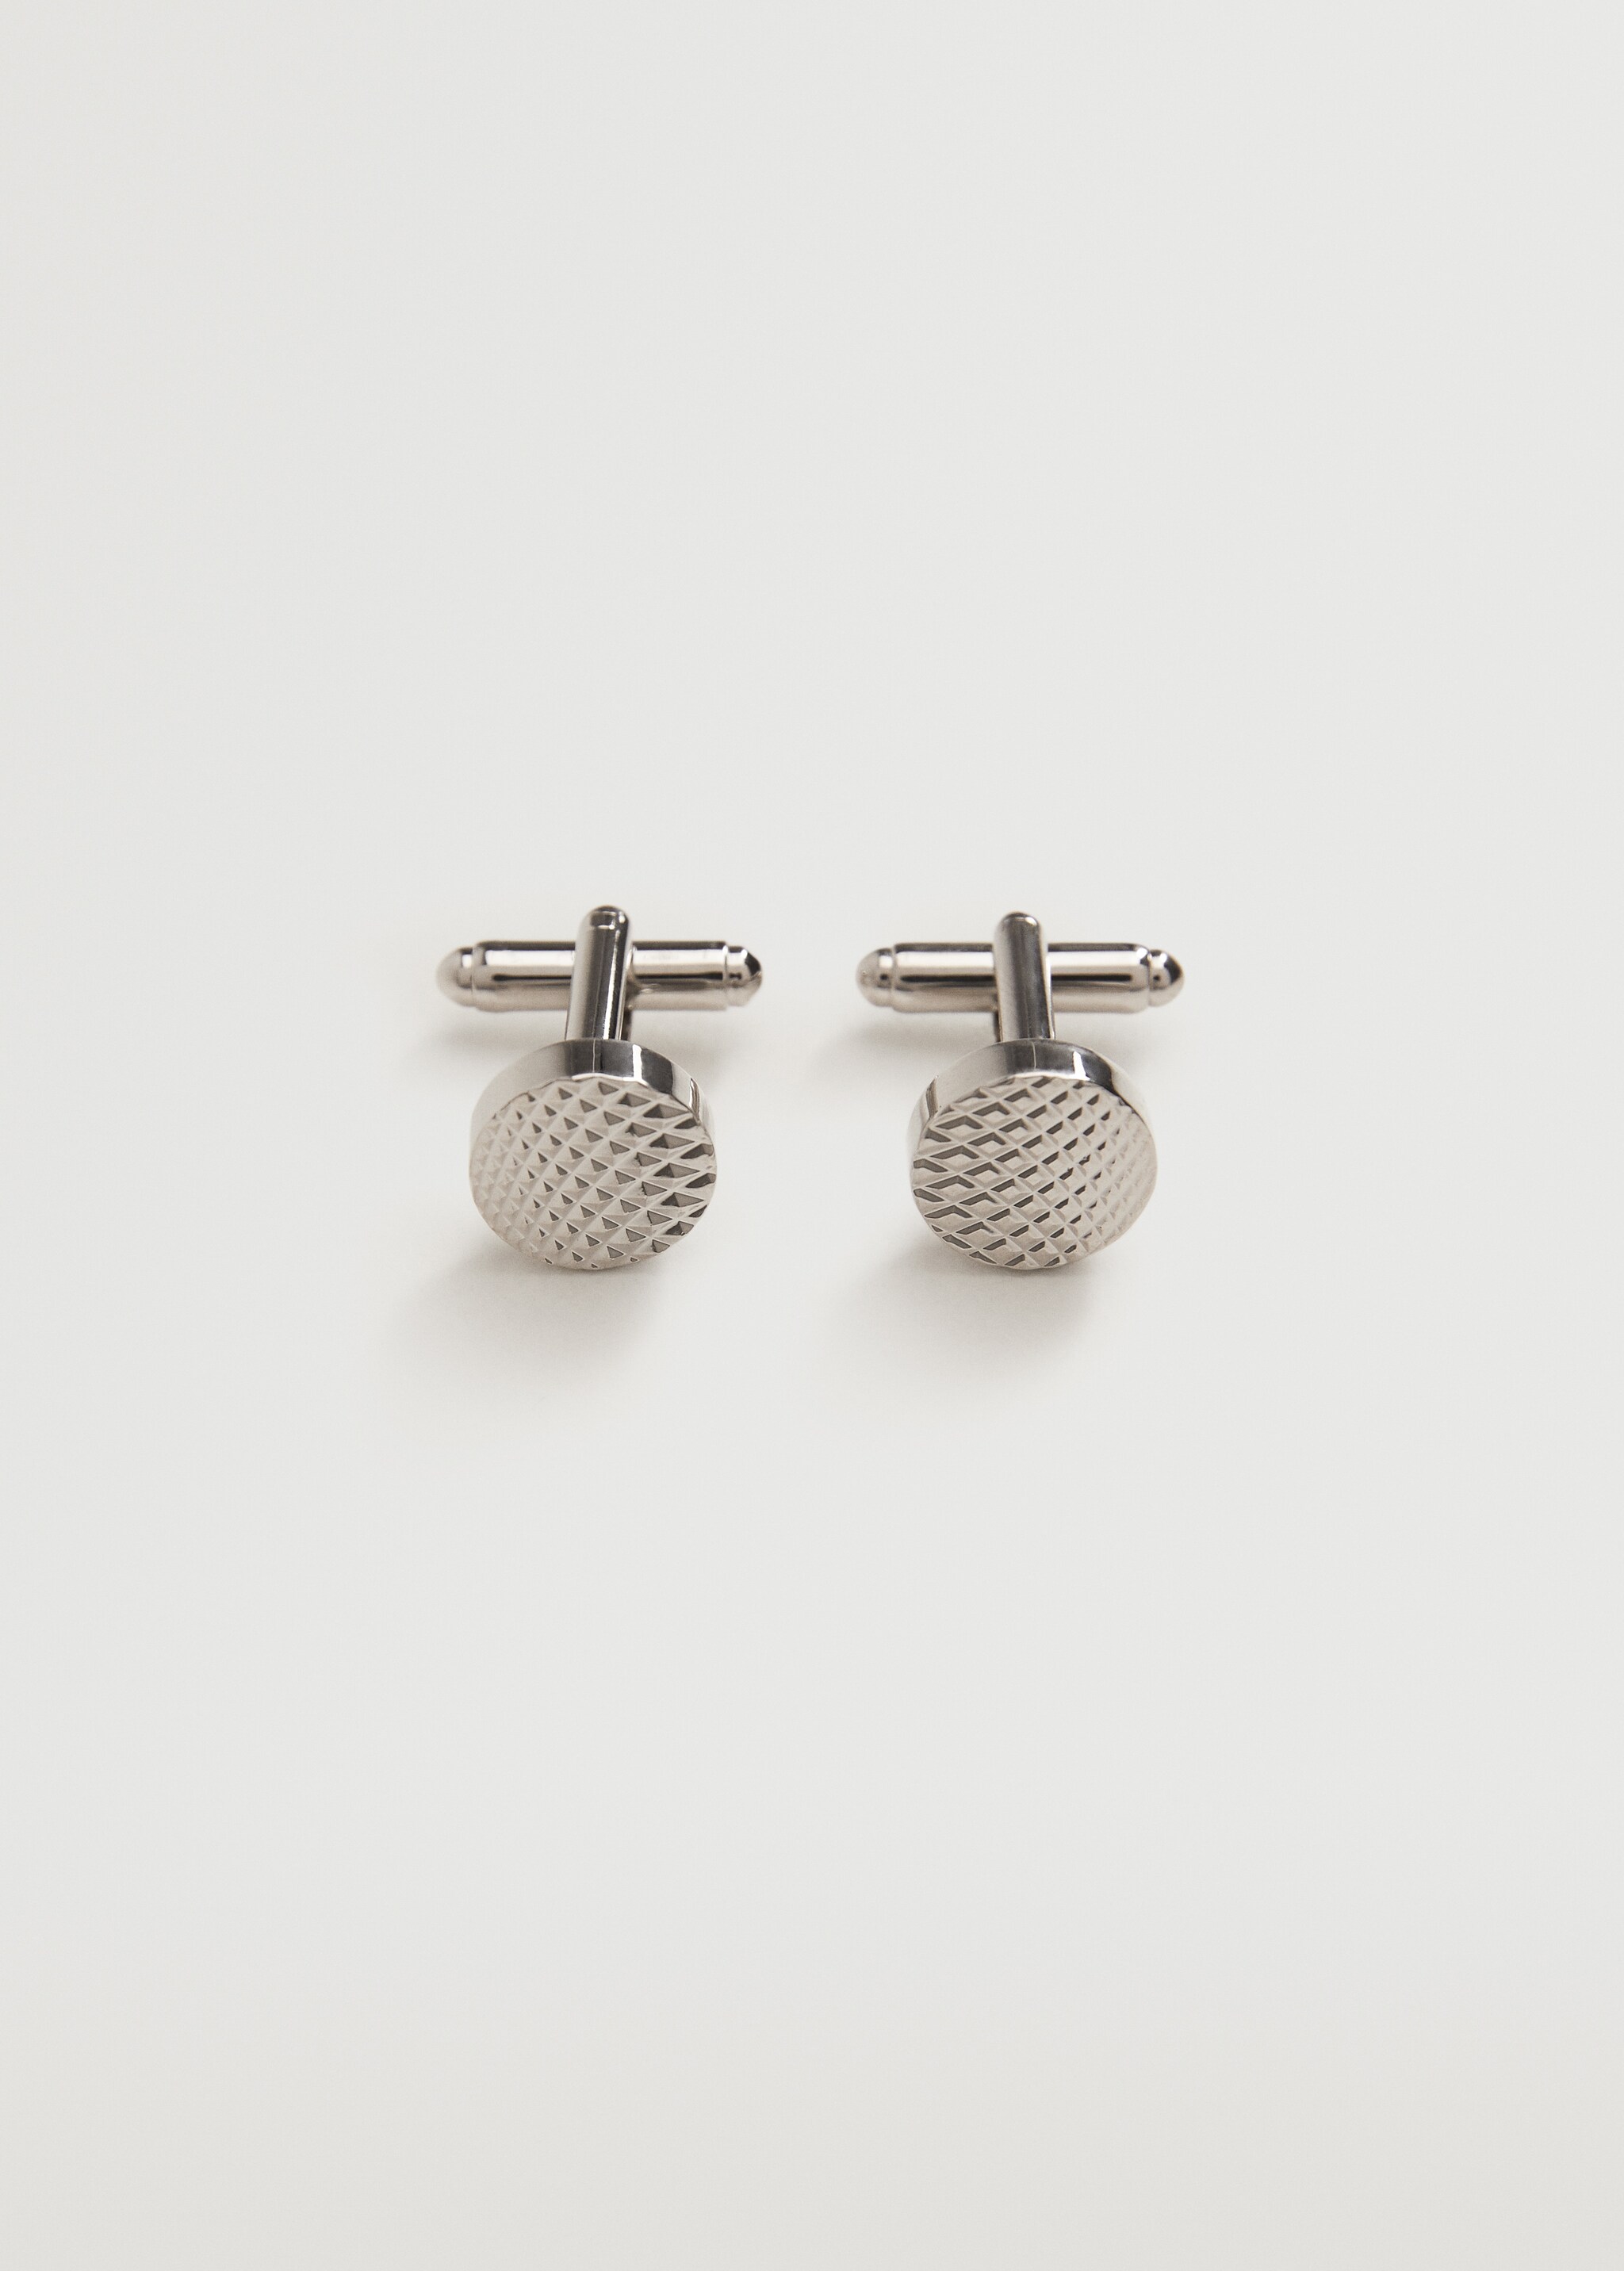 Rounded cufflinks - Article without model